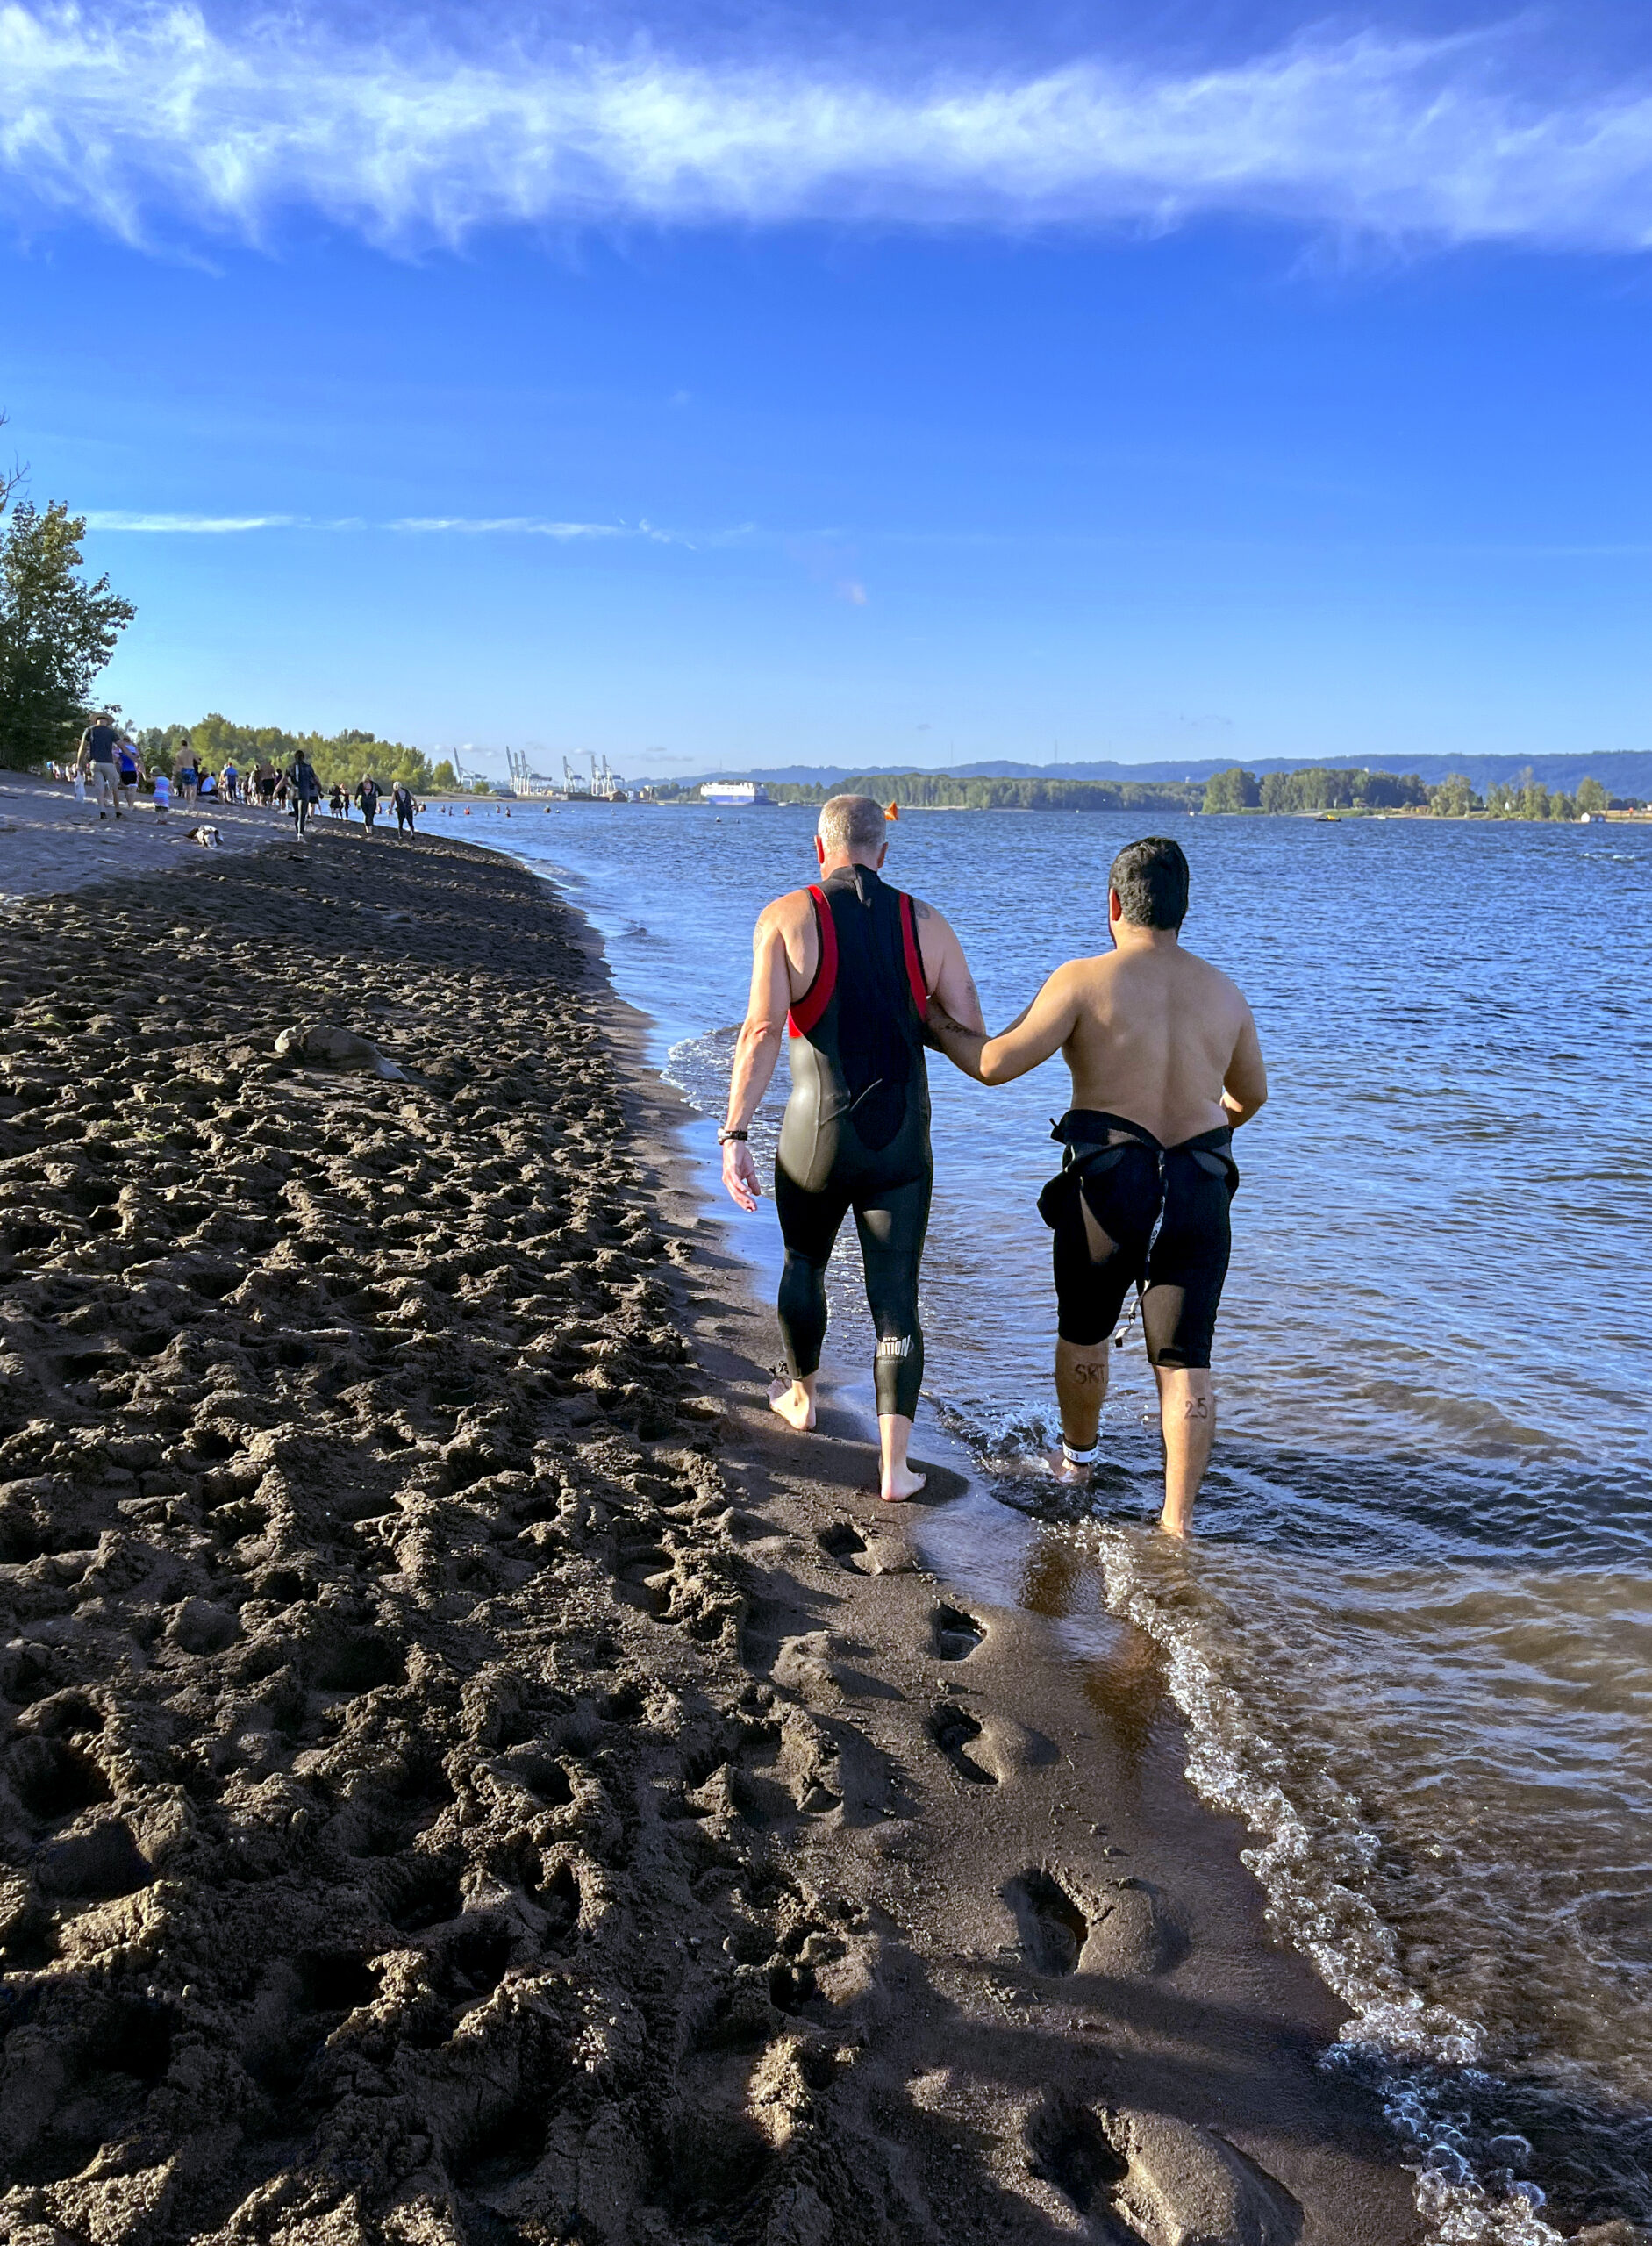 Two men walk arm-in-arm along a beach, both wearing wetsuits. Footprints in the sand trail behind them.